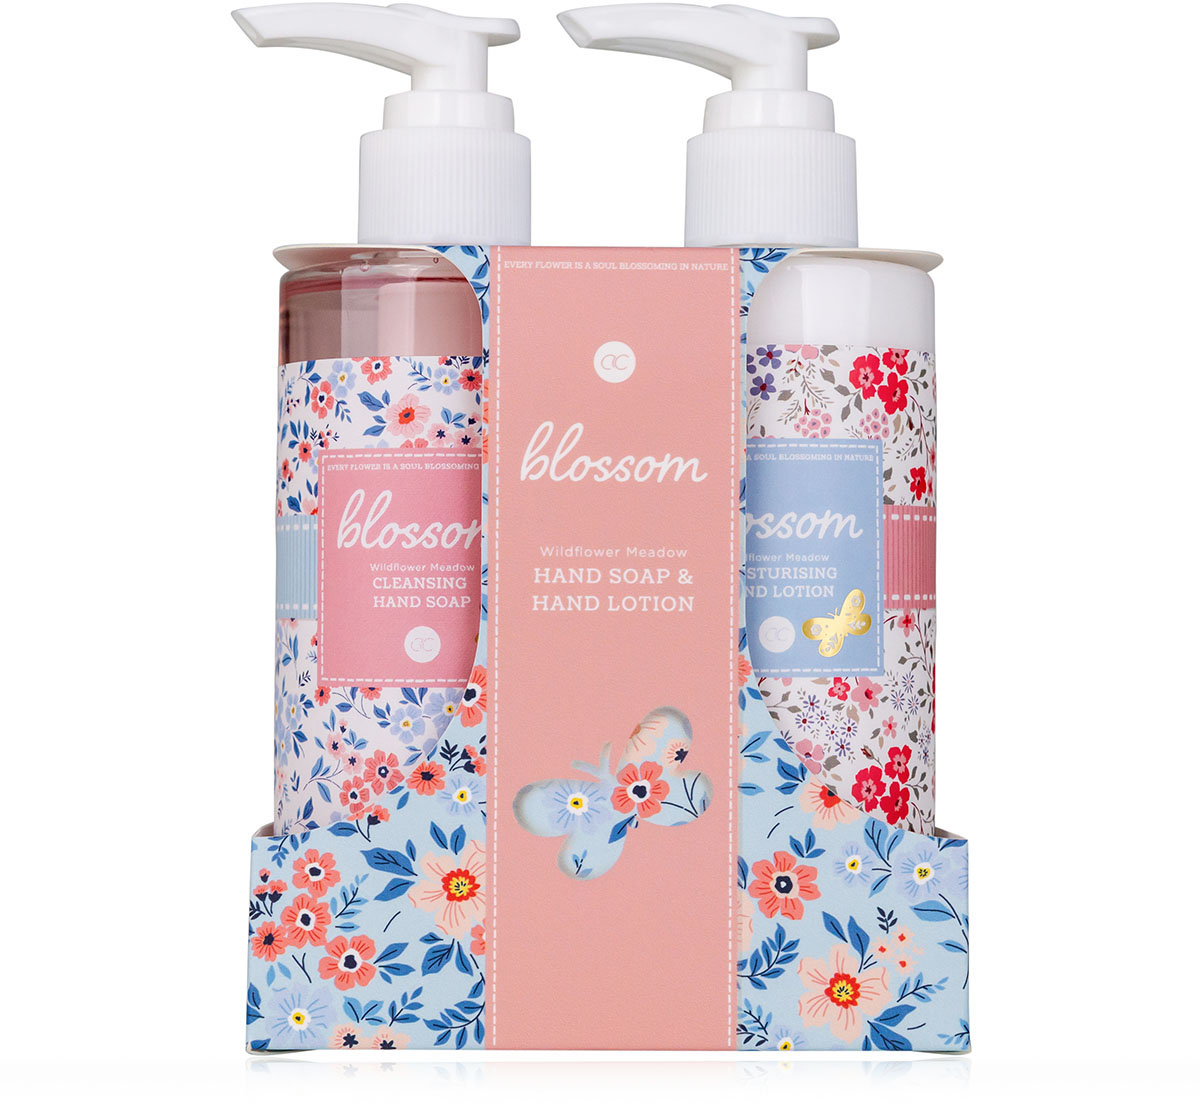 ACCENTRA Hand care set Blossom 6057685 Scent : Wild flower meadow